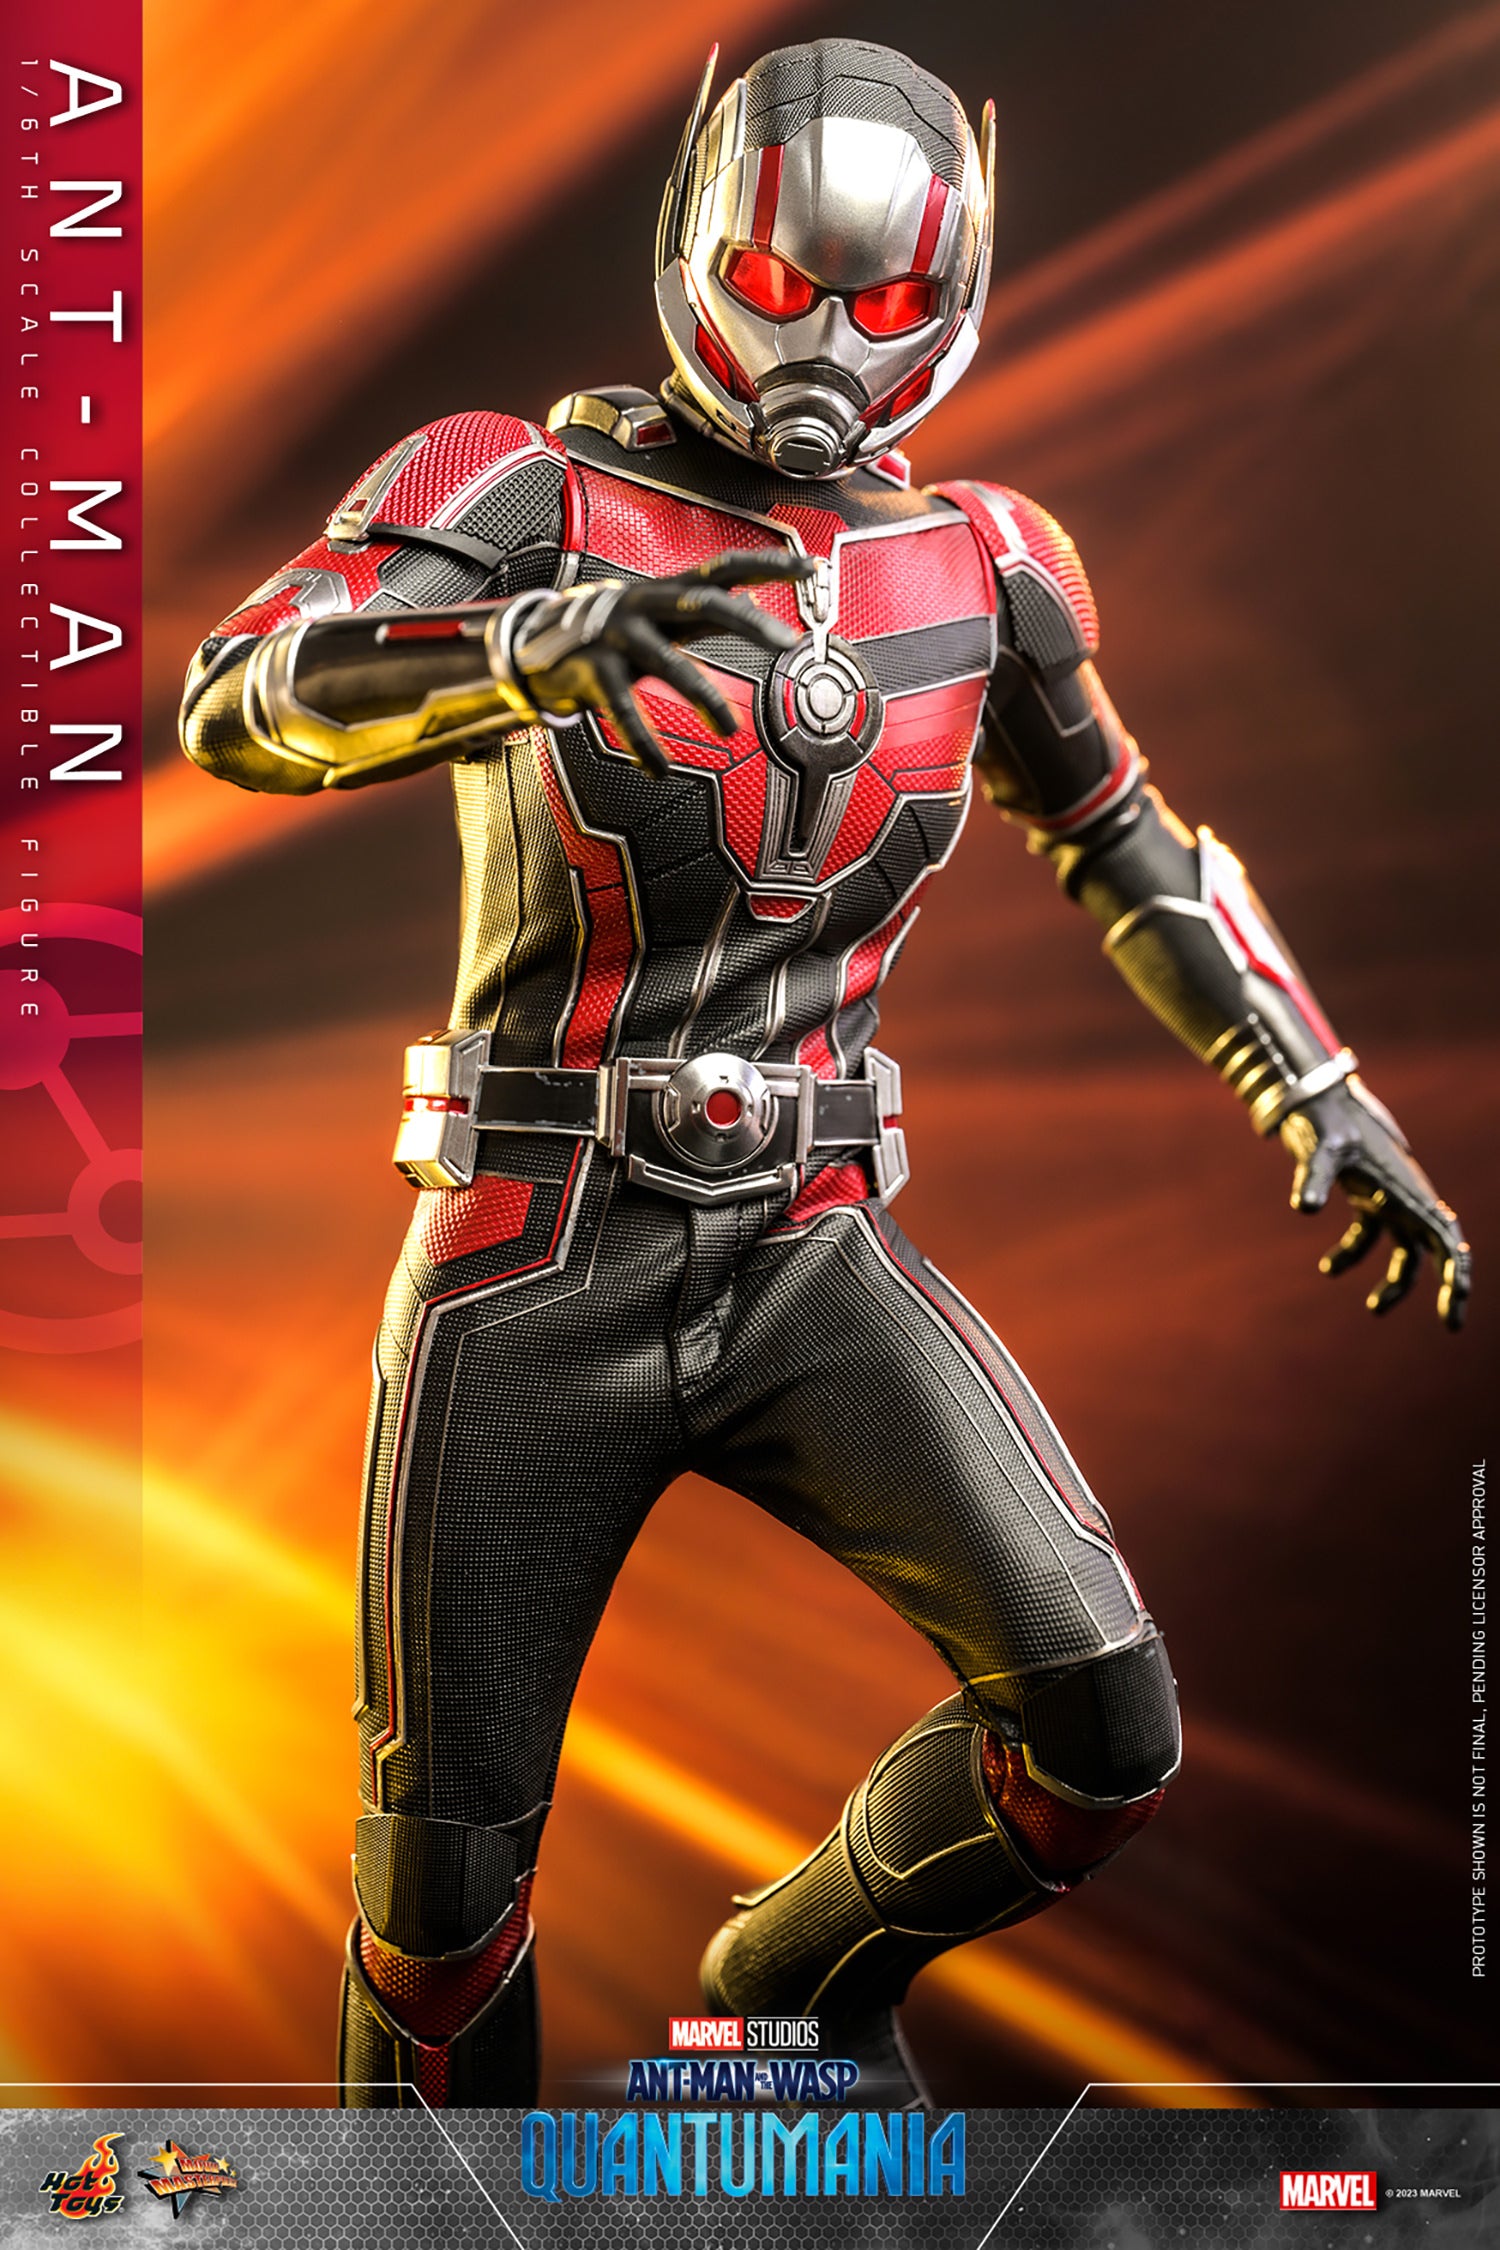 Hot Toys Marvel Comics Ant-Man and the Wasp Quantumania Ant-Man 1